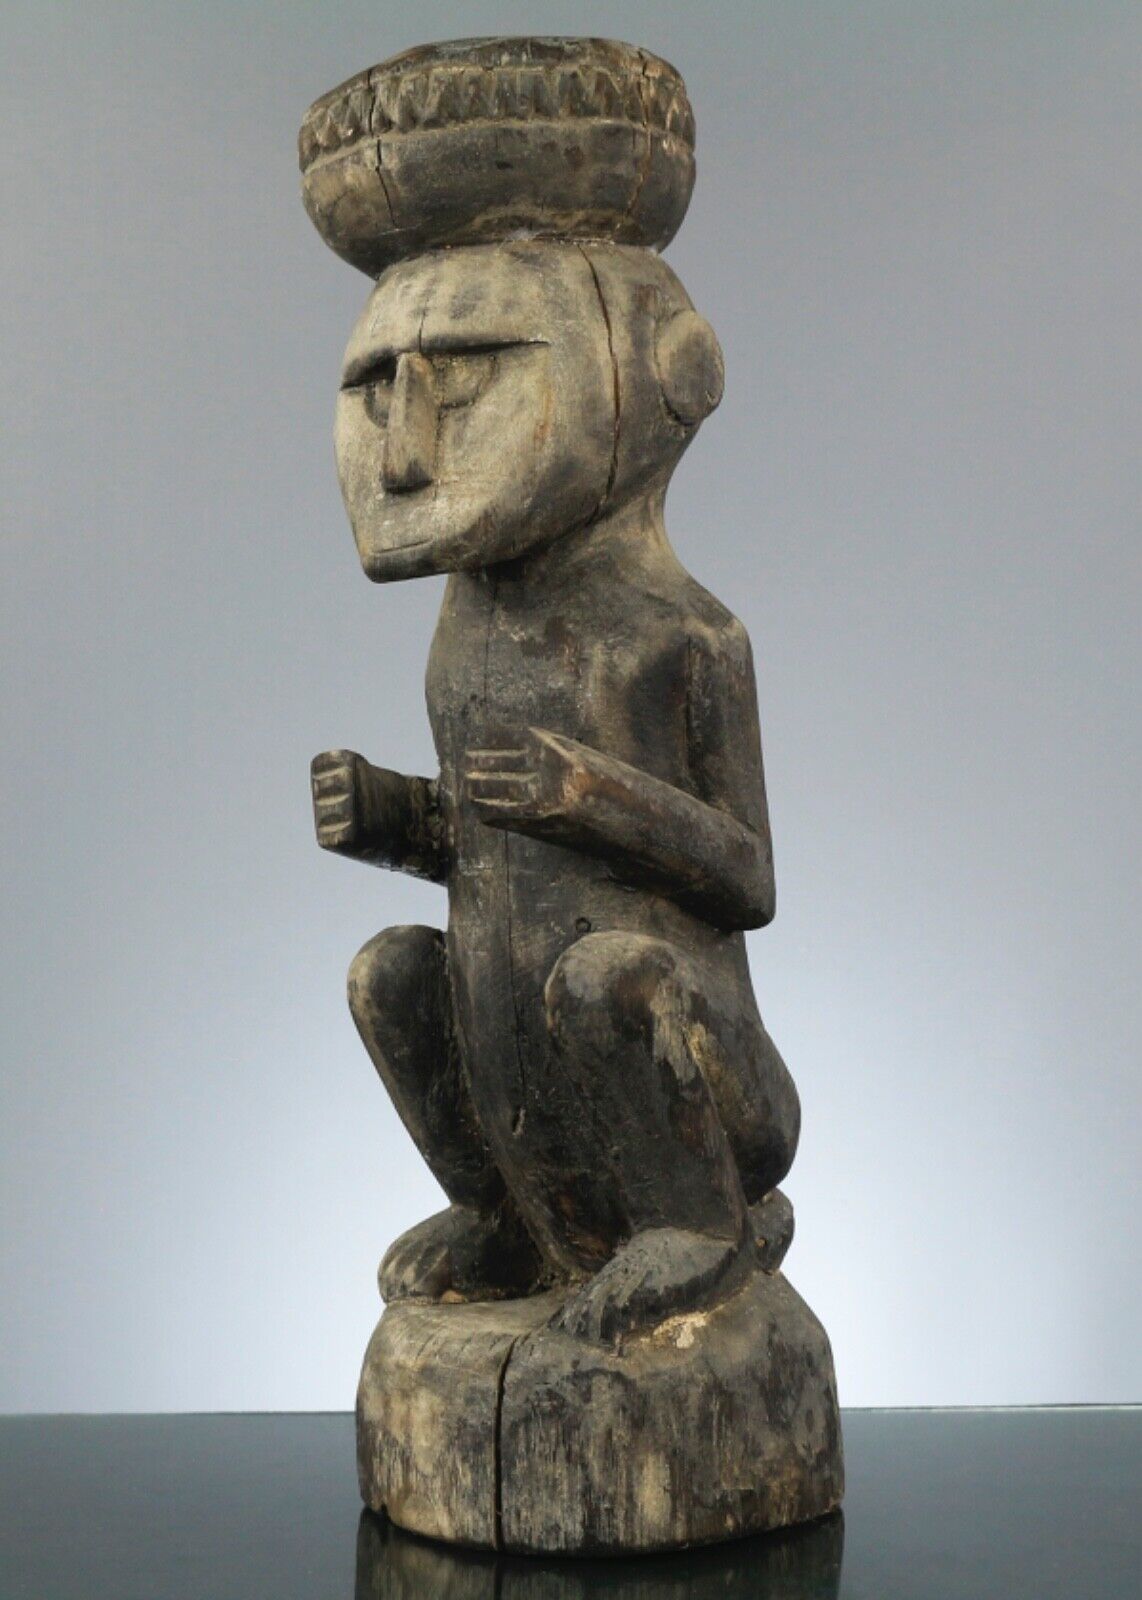 Old Sumba Tribe Wood Carving Fine Art Statue Tribal Art Seated Figure 14